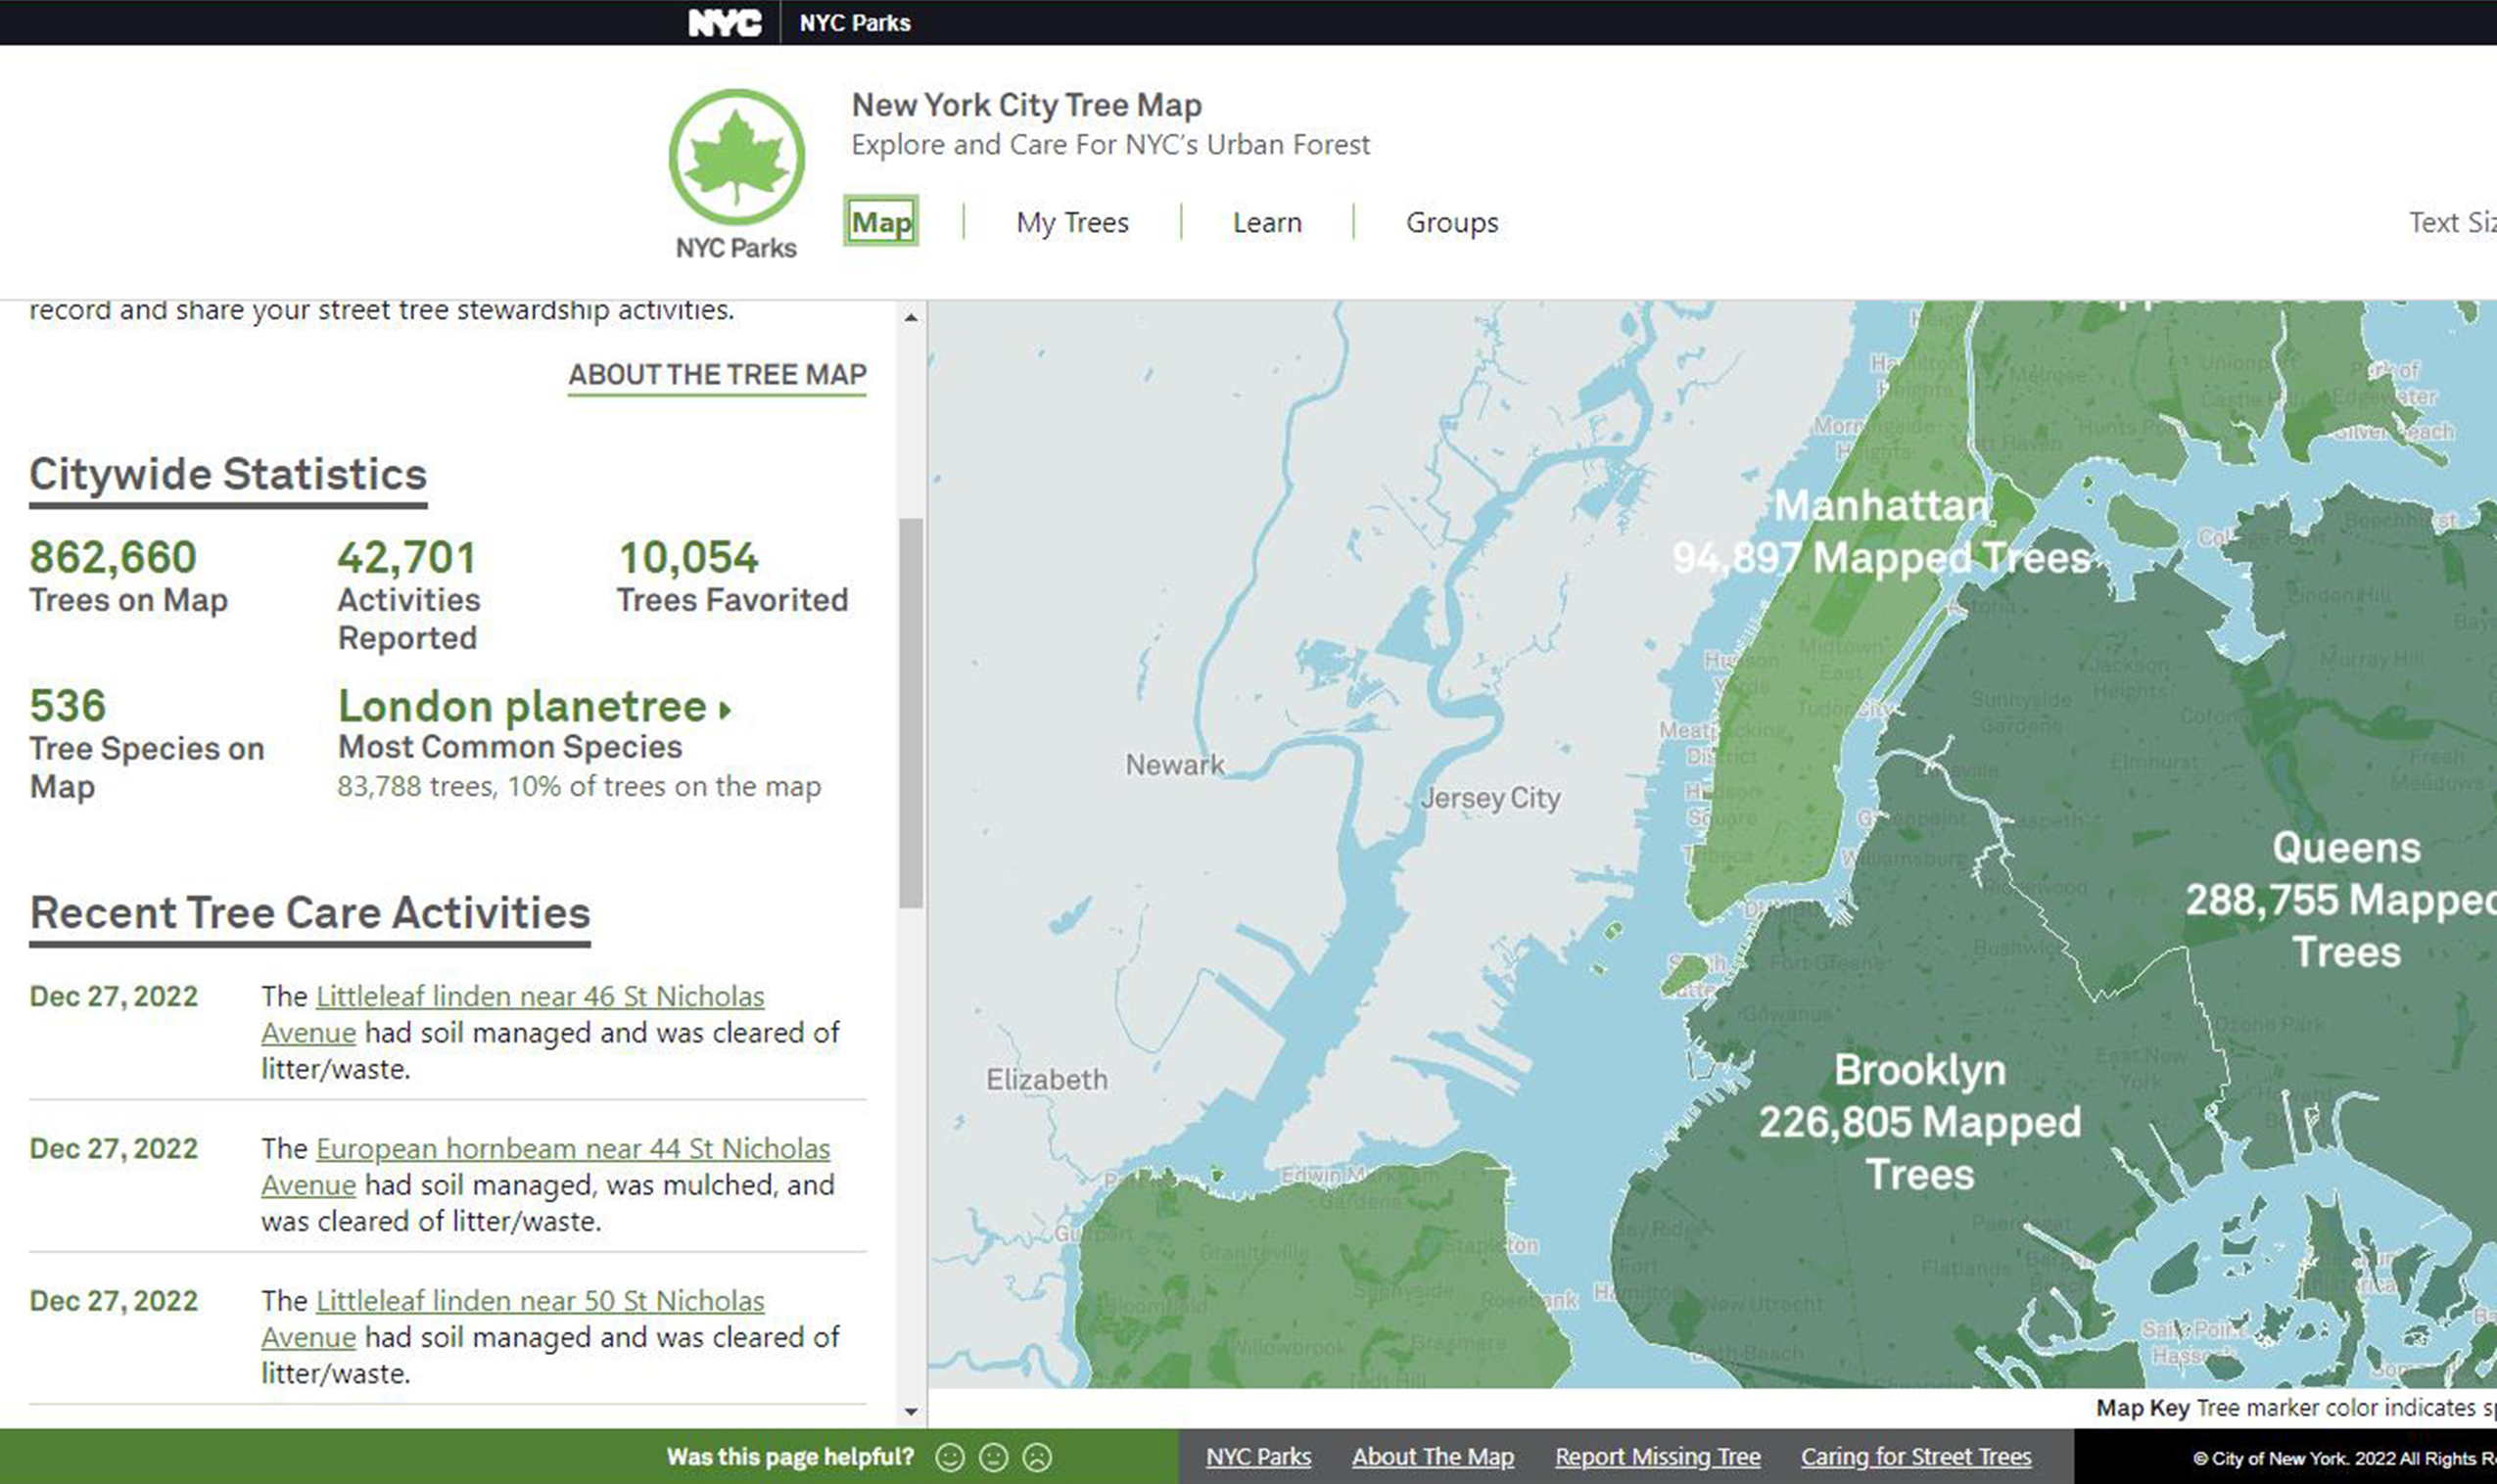 Tree Map Encourages Residents to Help Care for City Trees